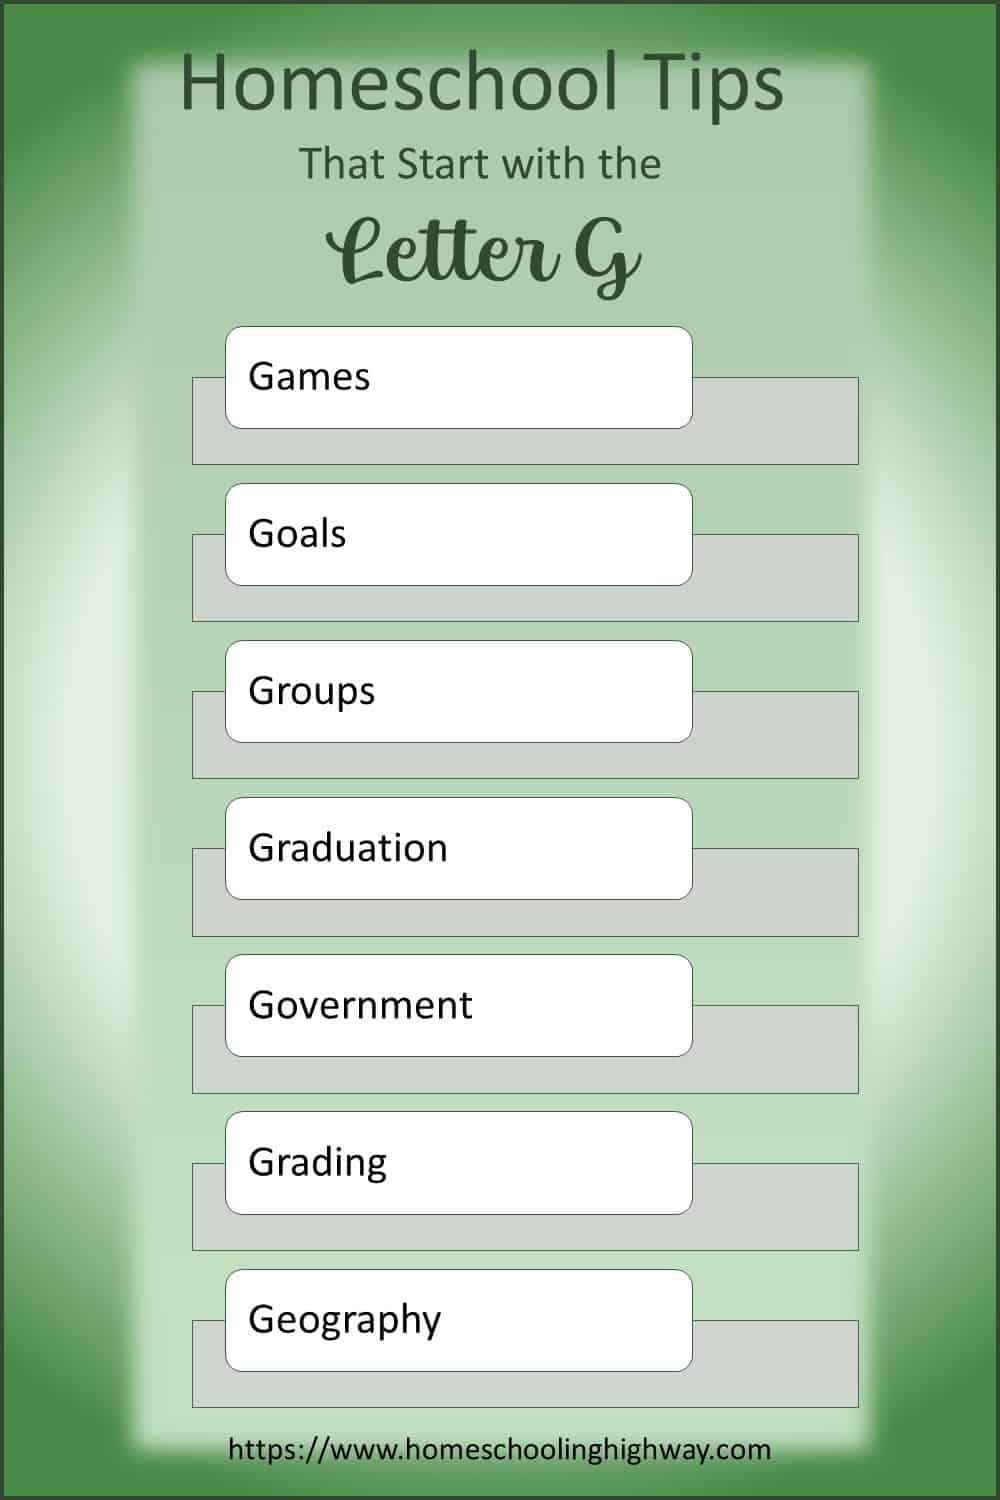 Homeschooling Tips That Start With G. Games, Goals, Groups, Graduation, Government, Grading